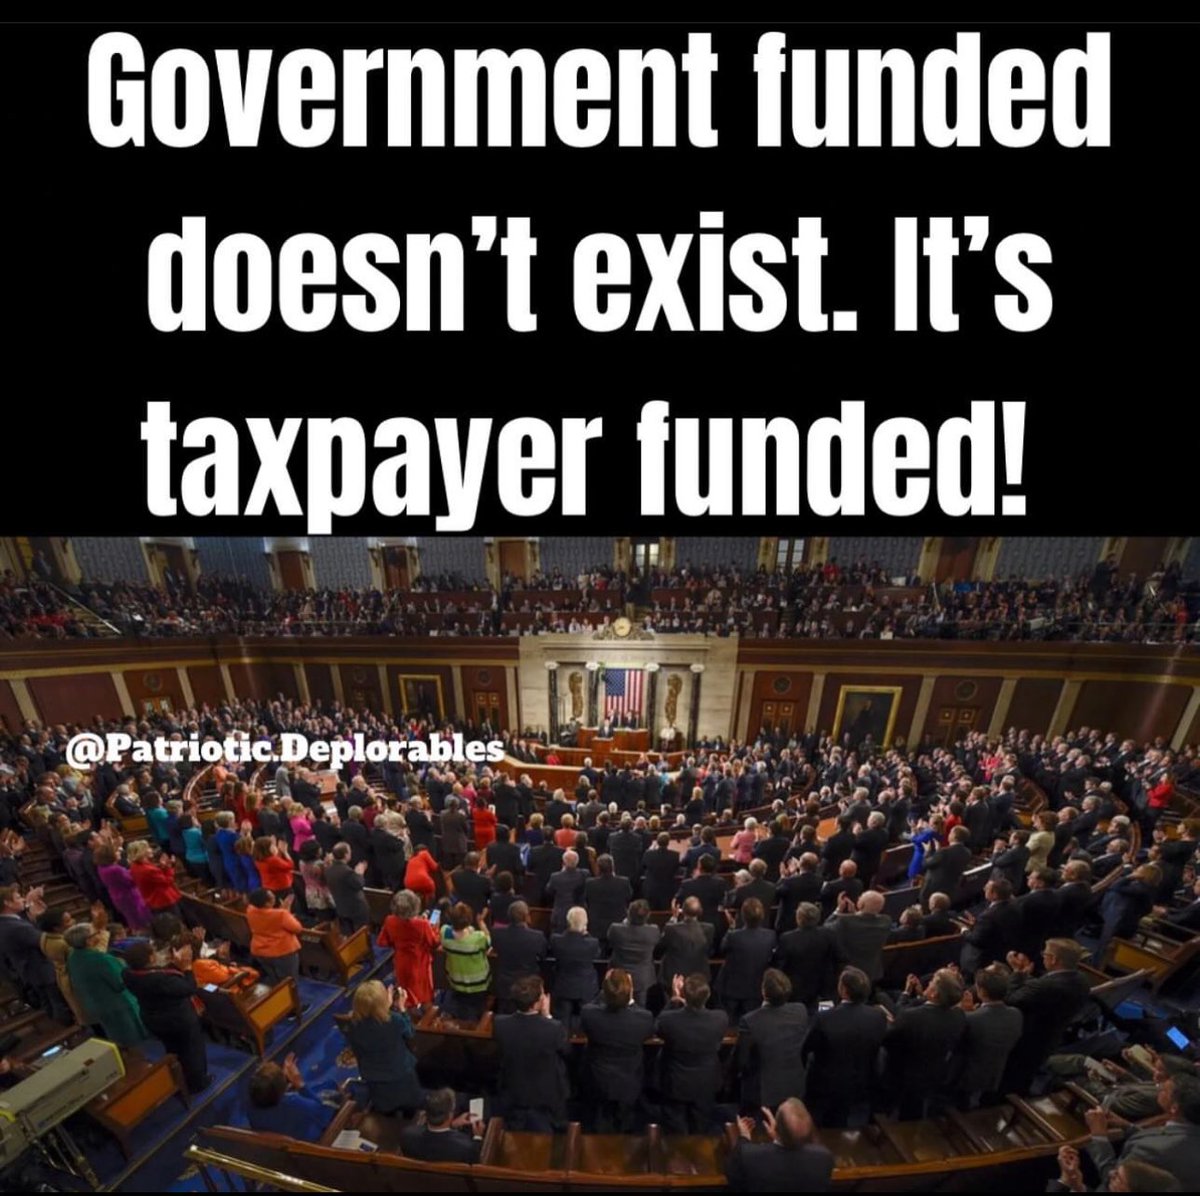 Absolutely nothing is government funded. I get so tired of hearing politicians say this.